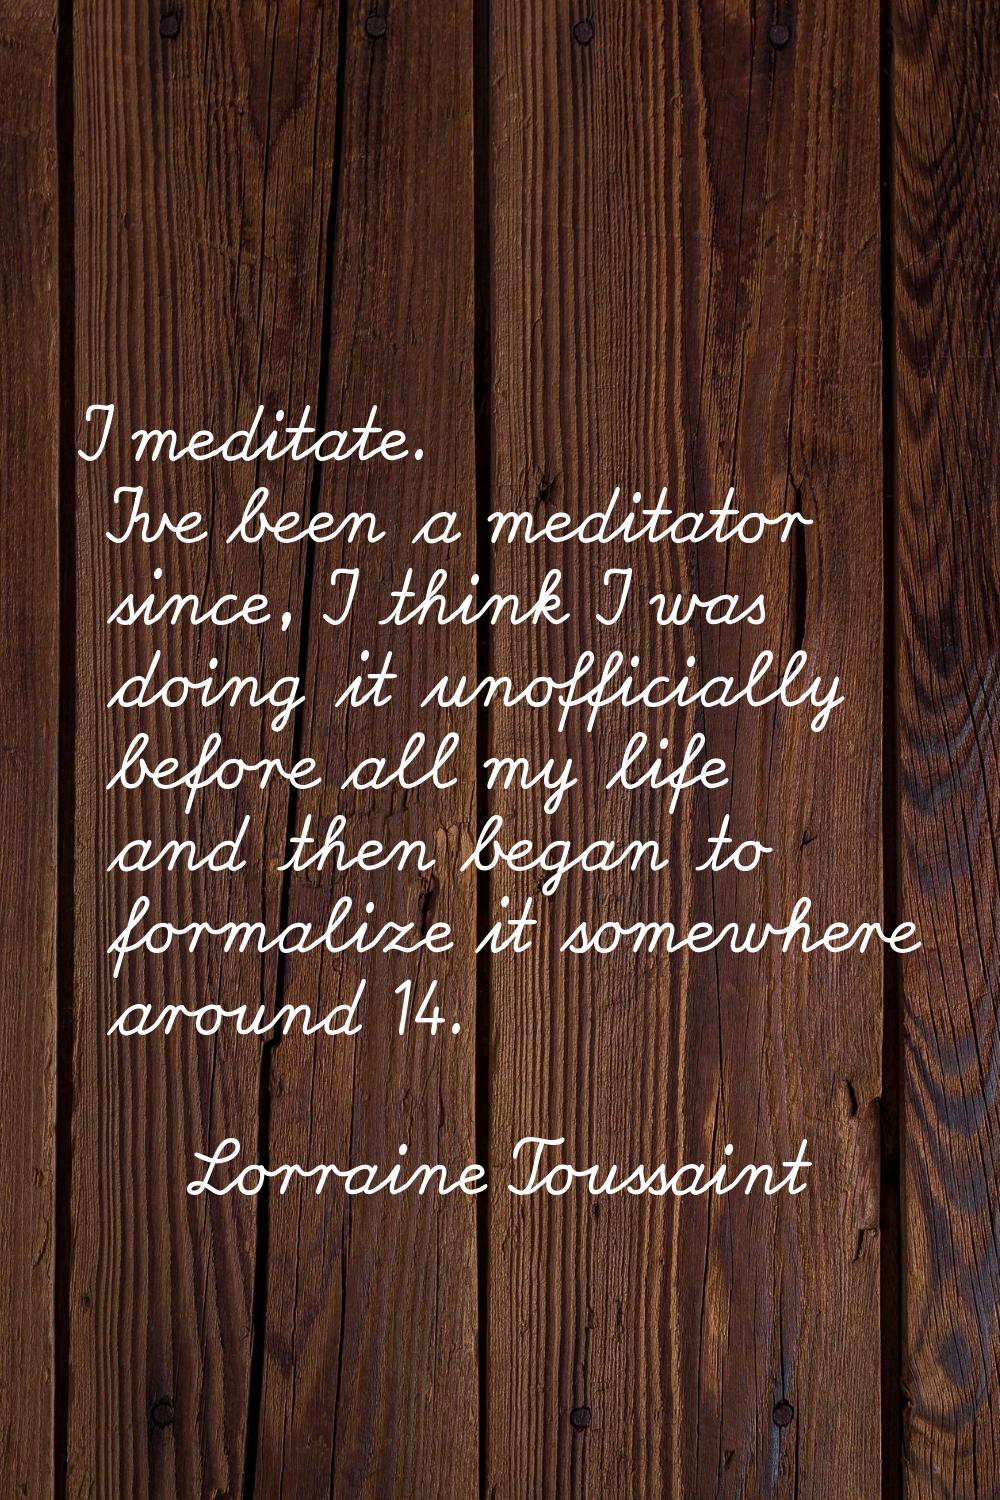 I meditate. I've been a meditator since, I think I was doing it unofficially before all my life and